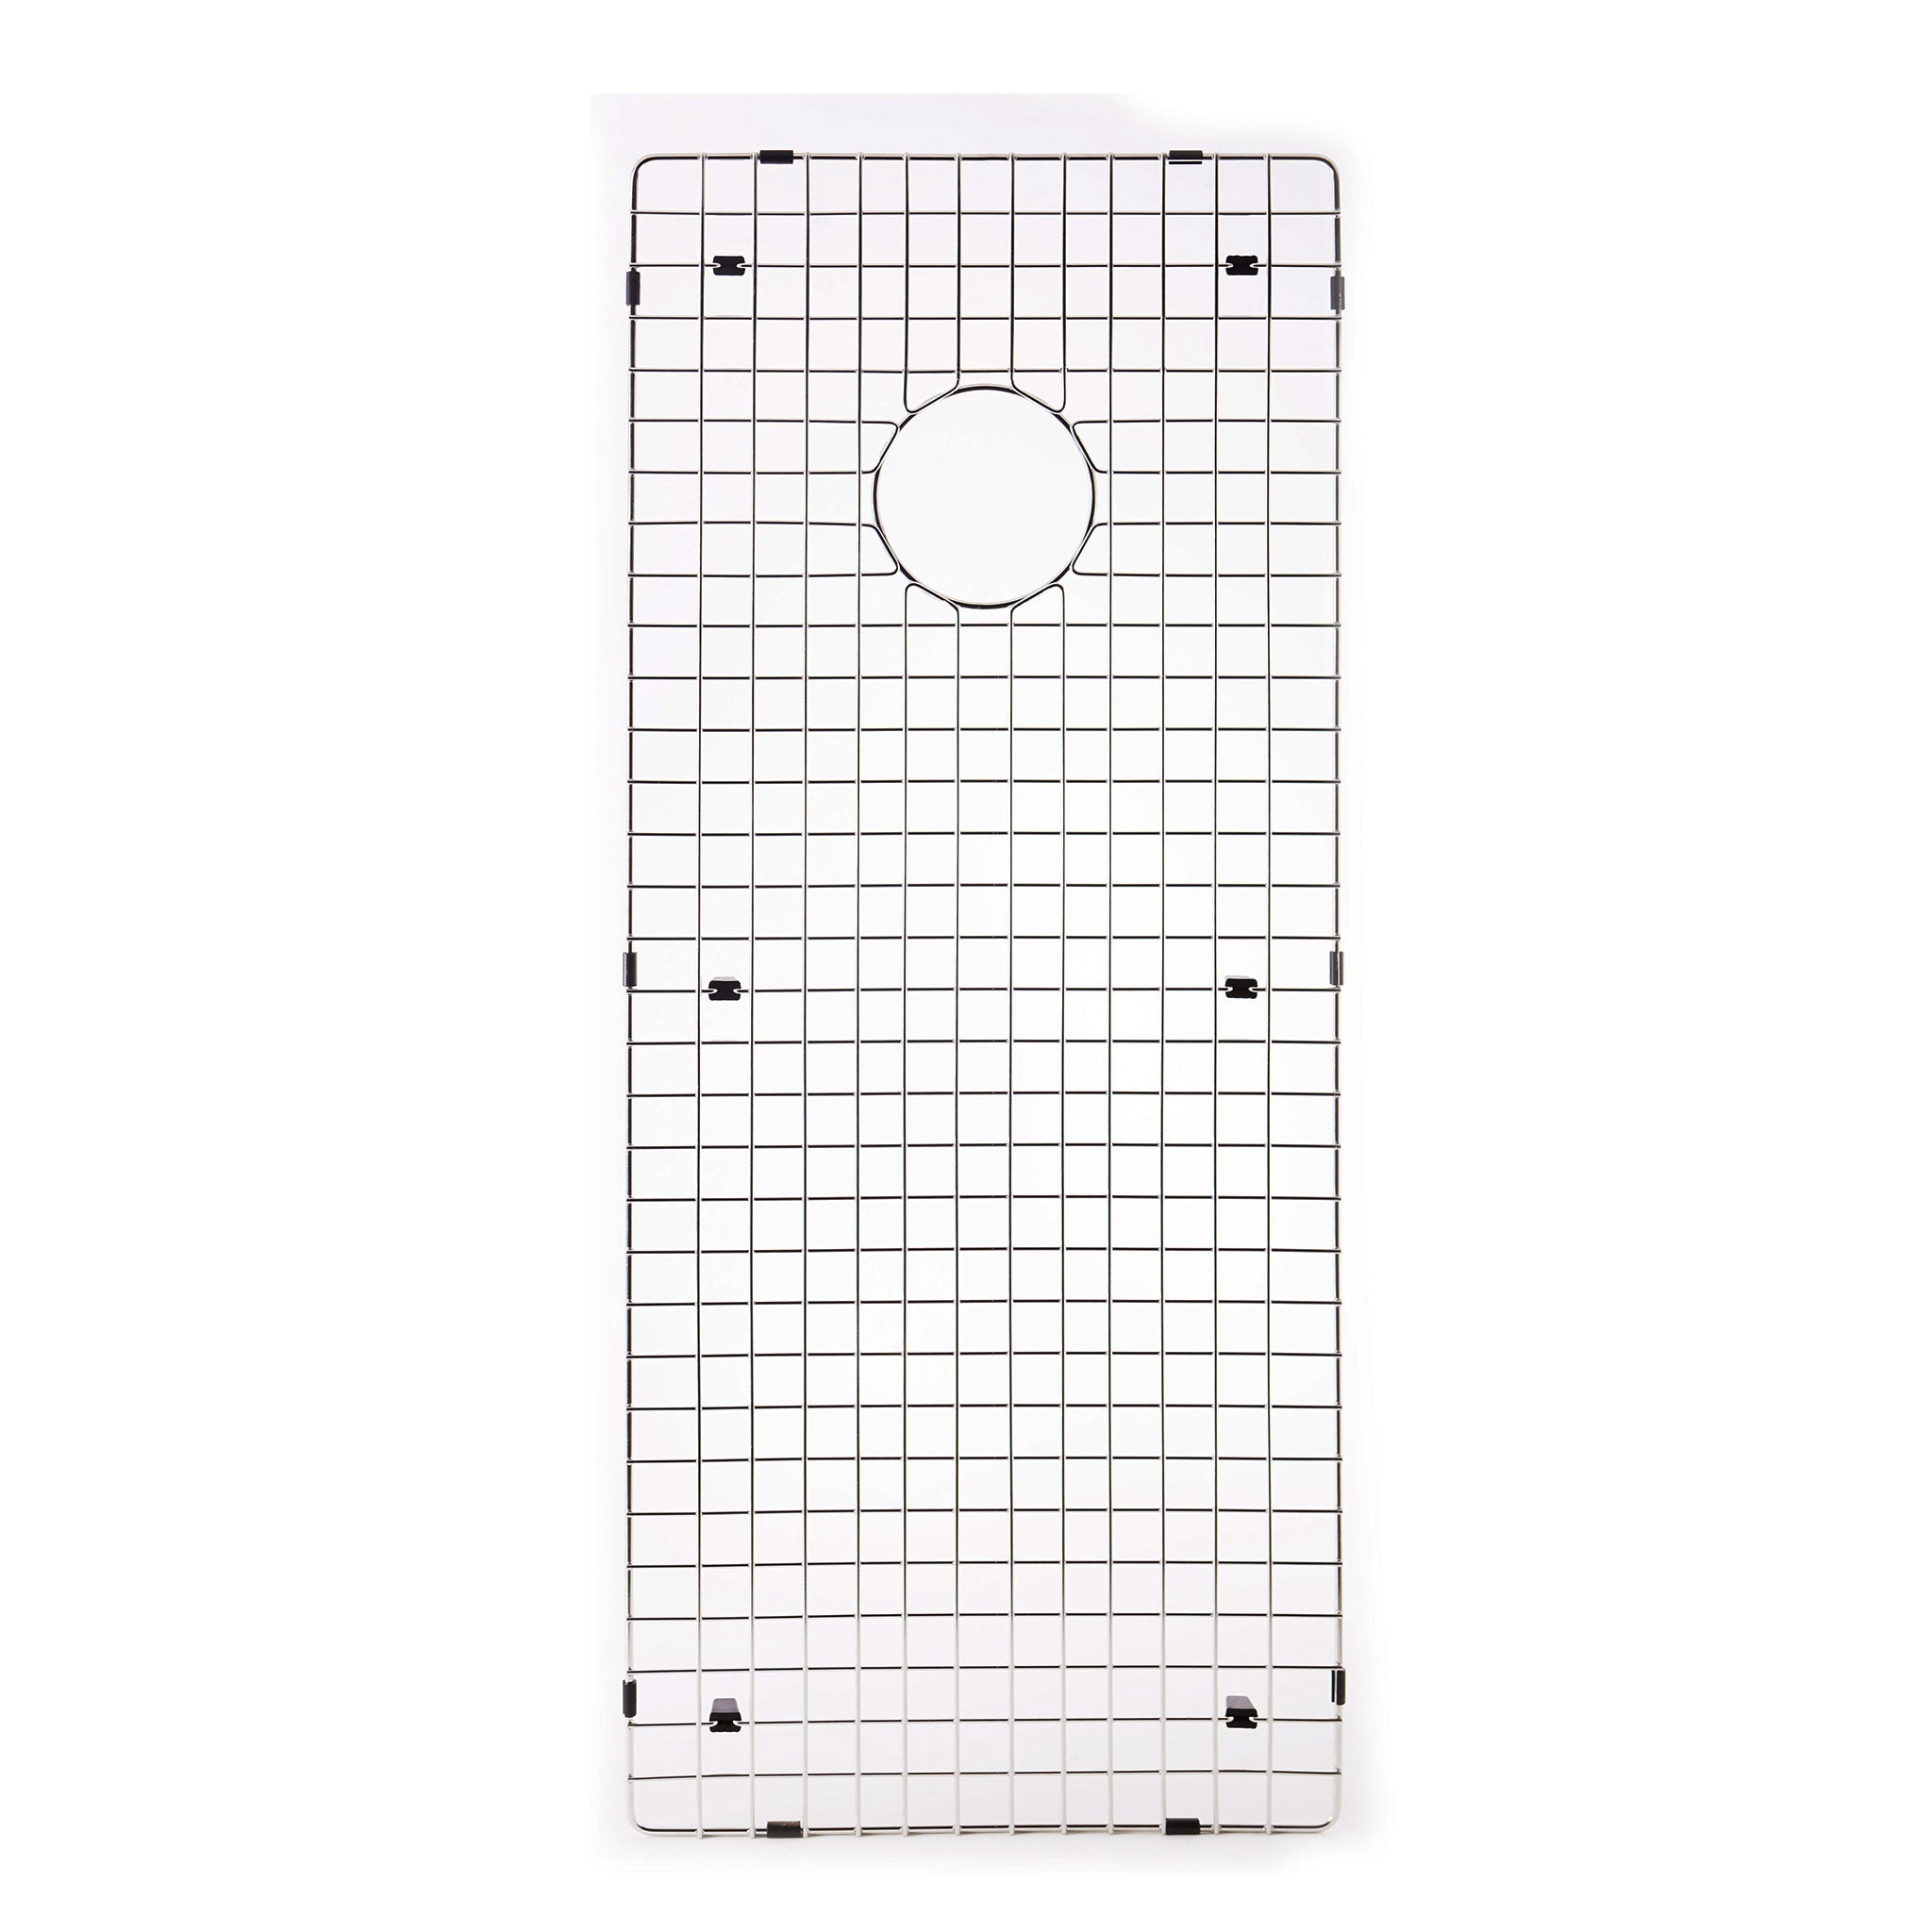 Products 50" stainless steel sink grid - offset - reversible